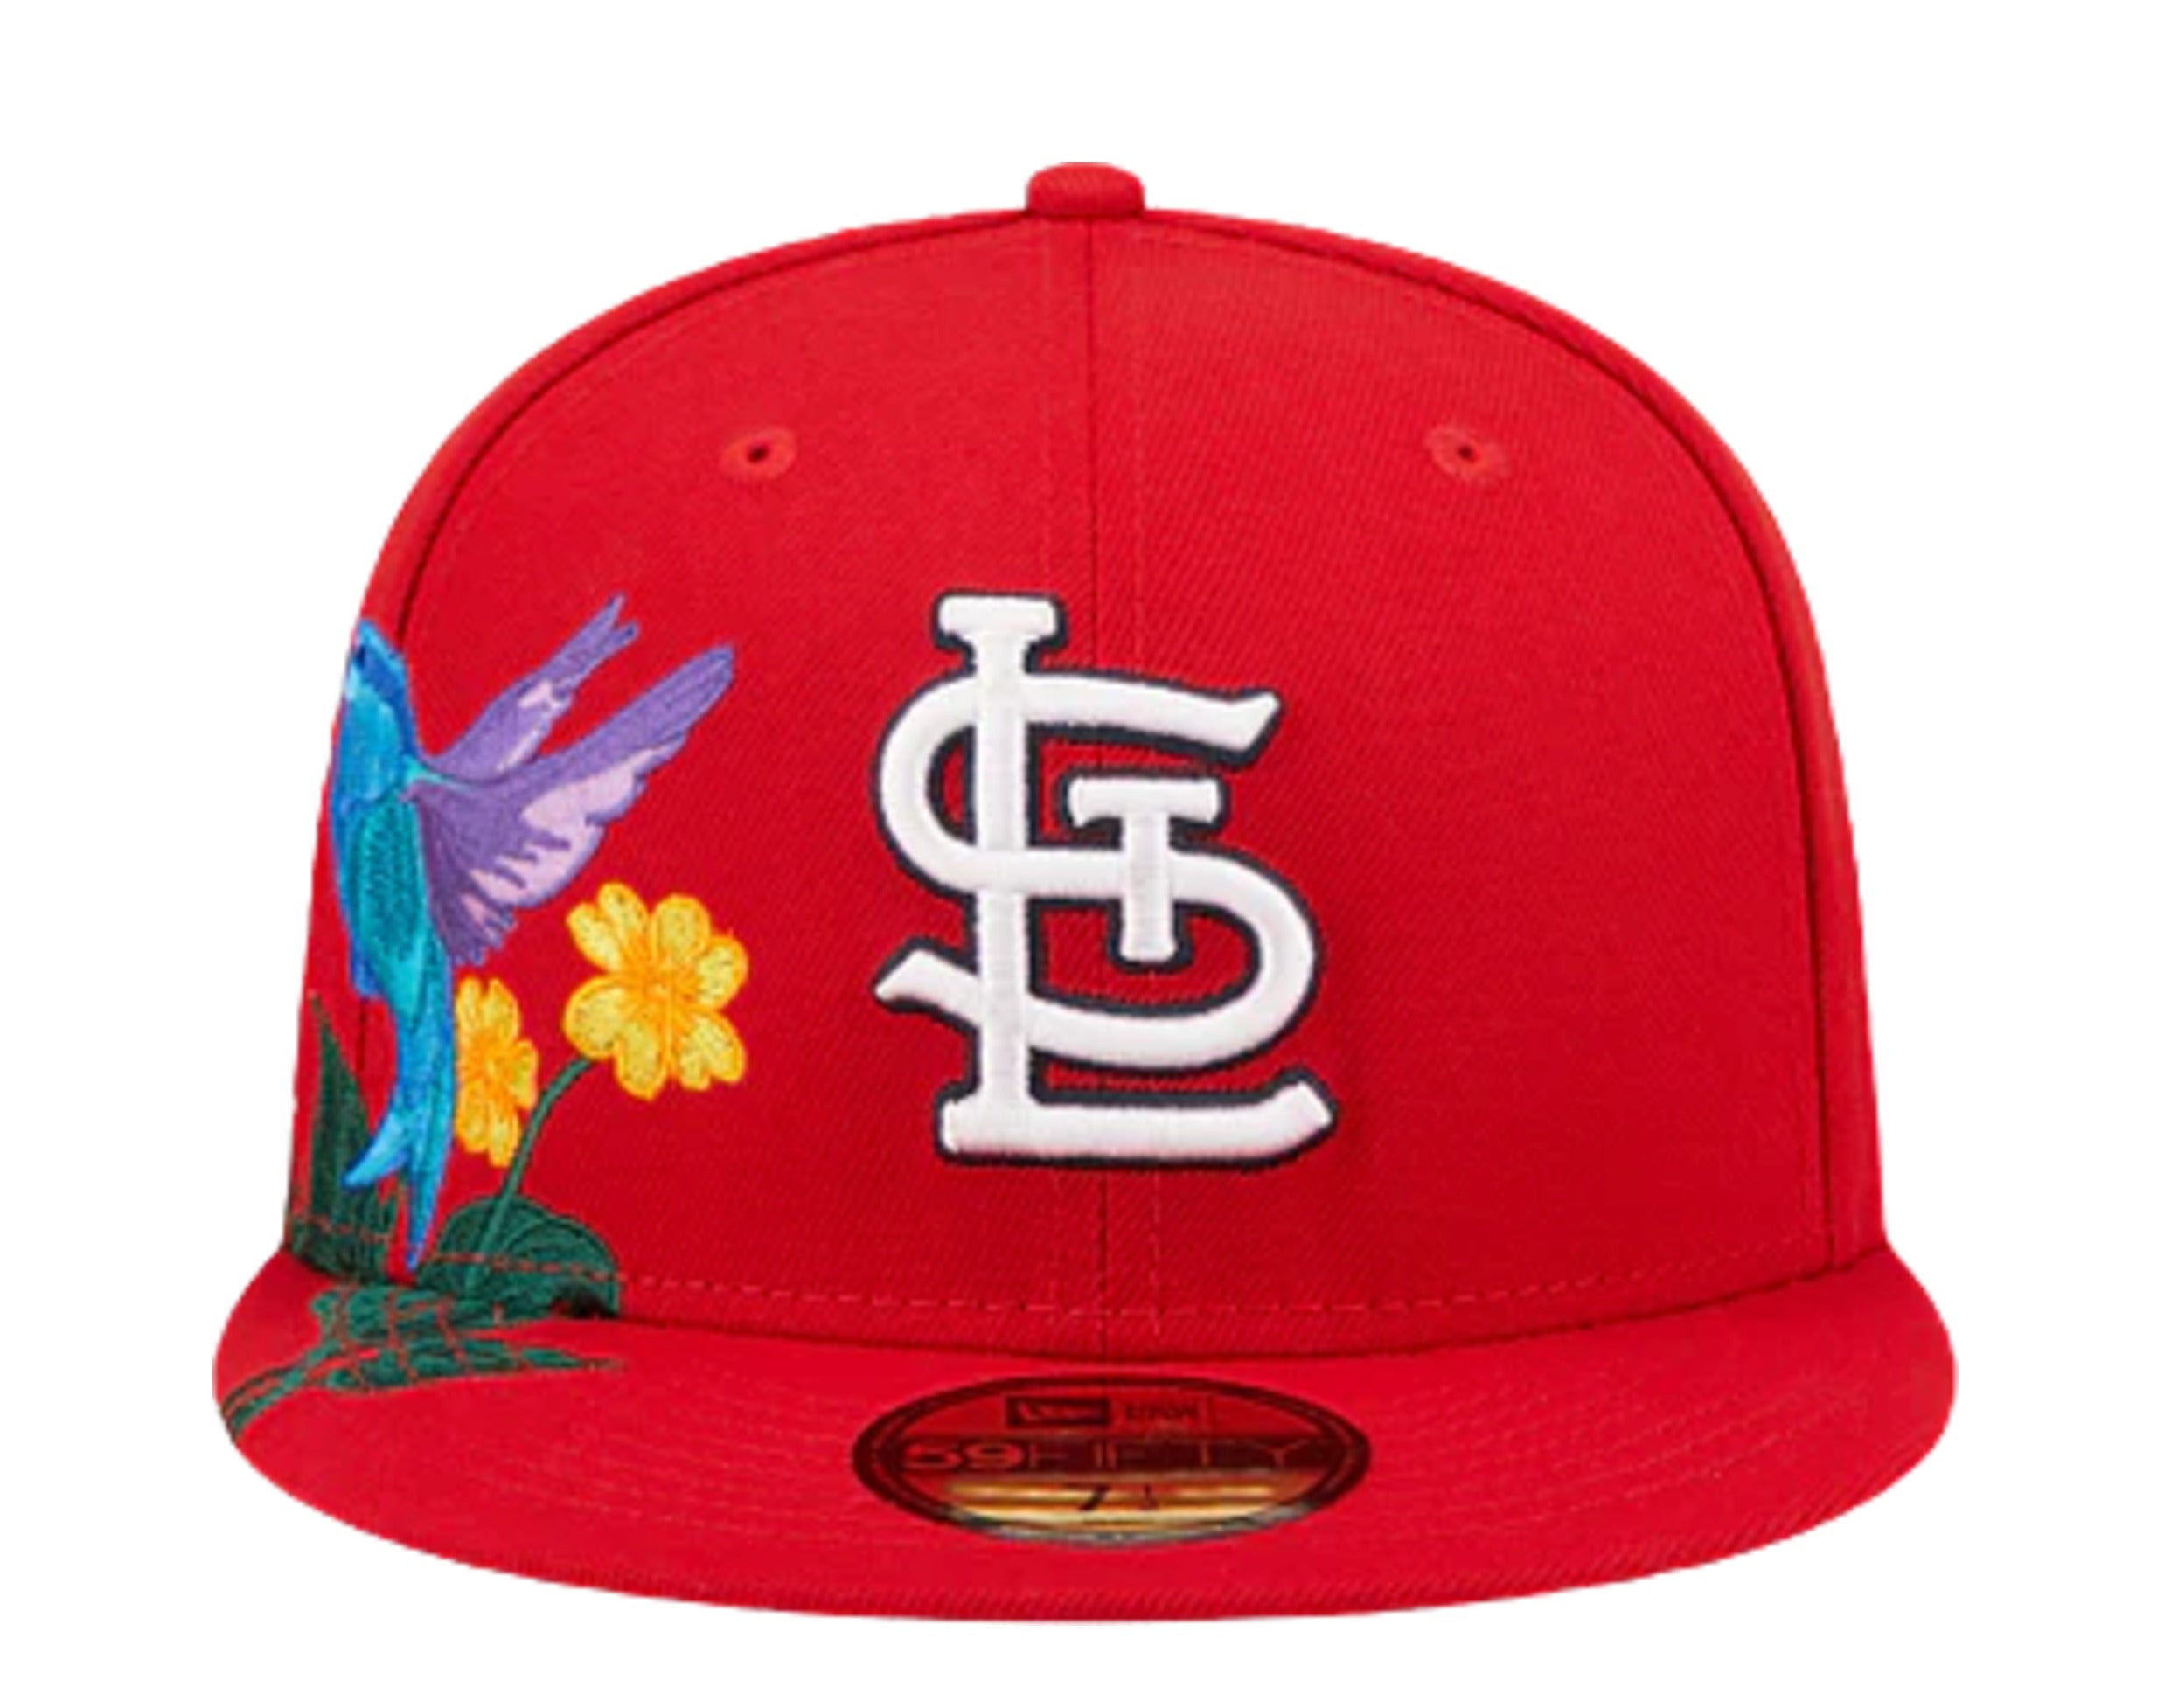 St. Louis Cardinals MLB Blooming Red 59FIFTY Fitted Cap